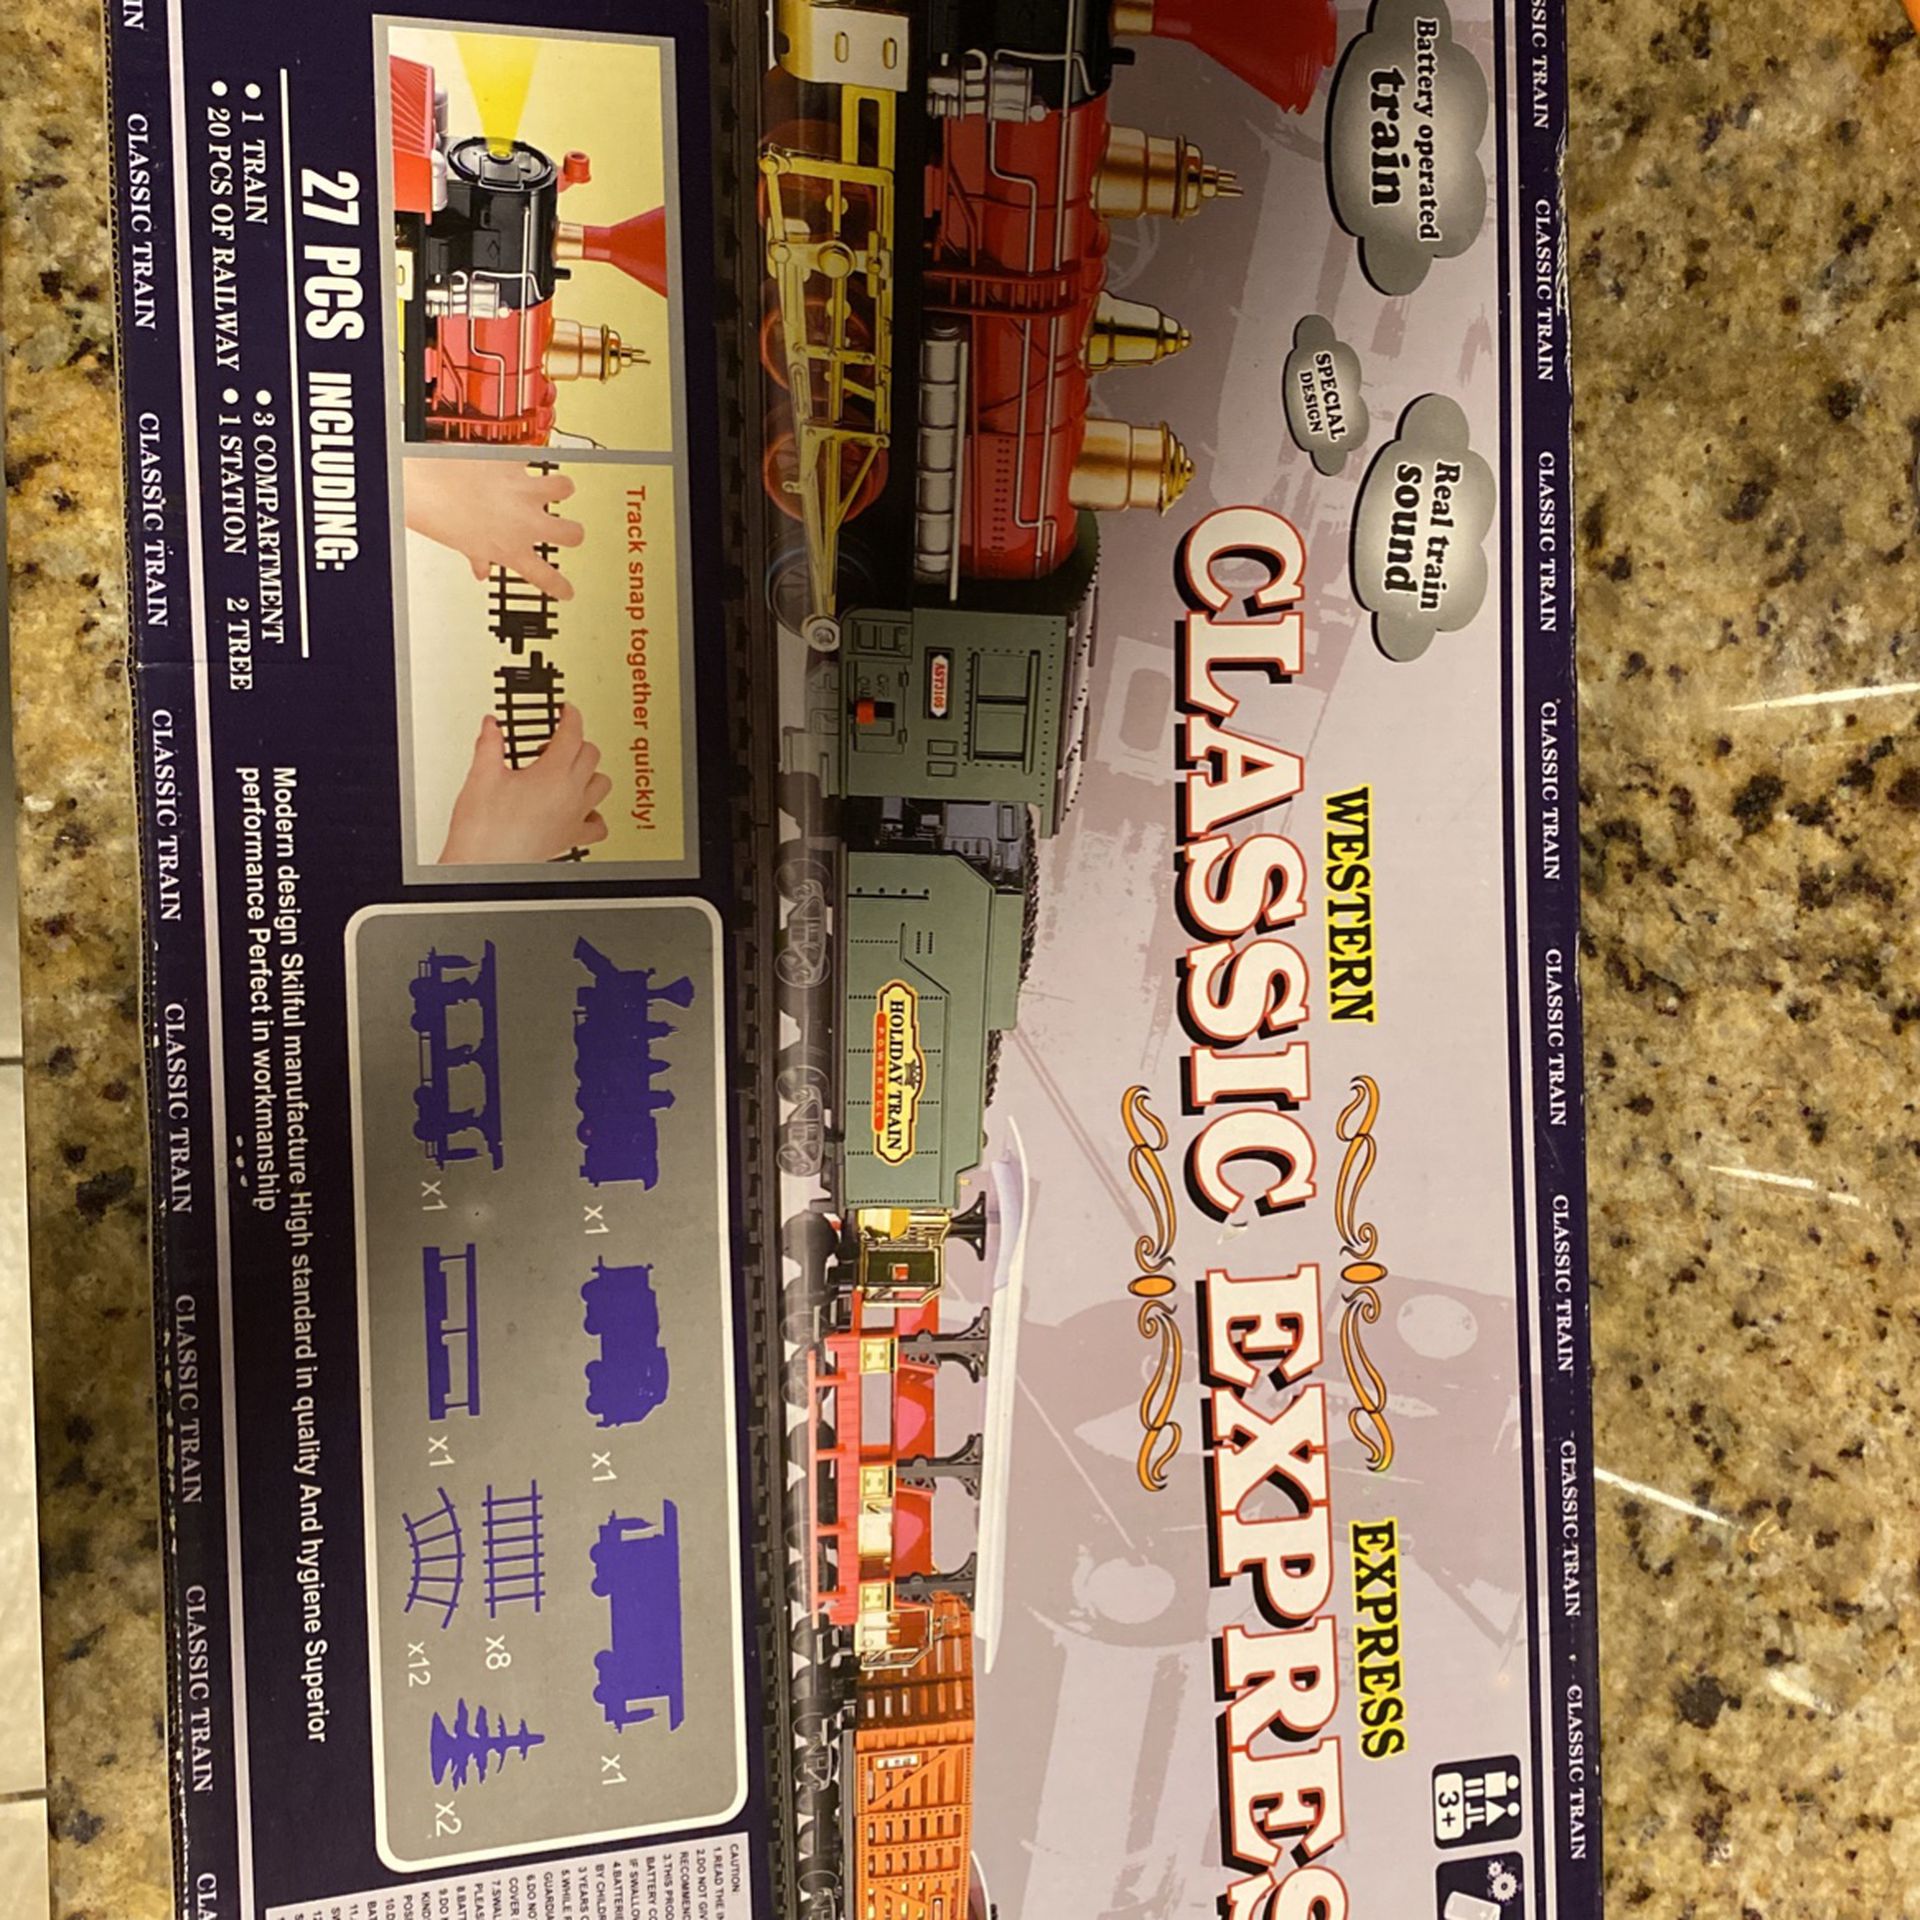 Western express classic Xpress battery operated train brand new in box